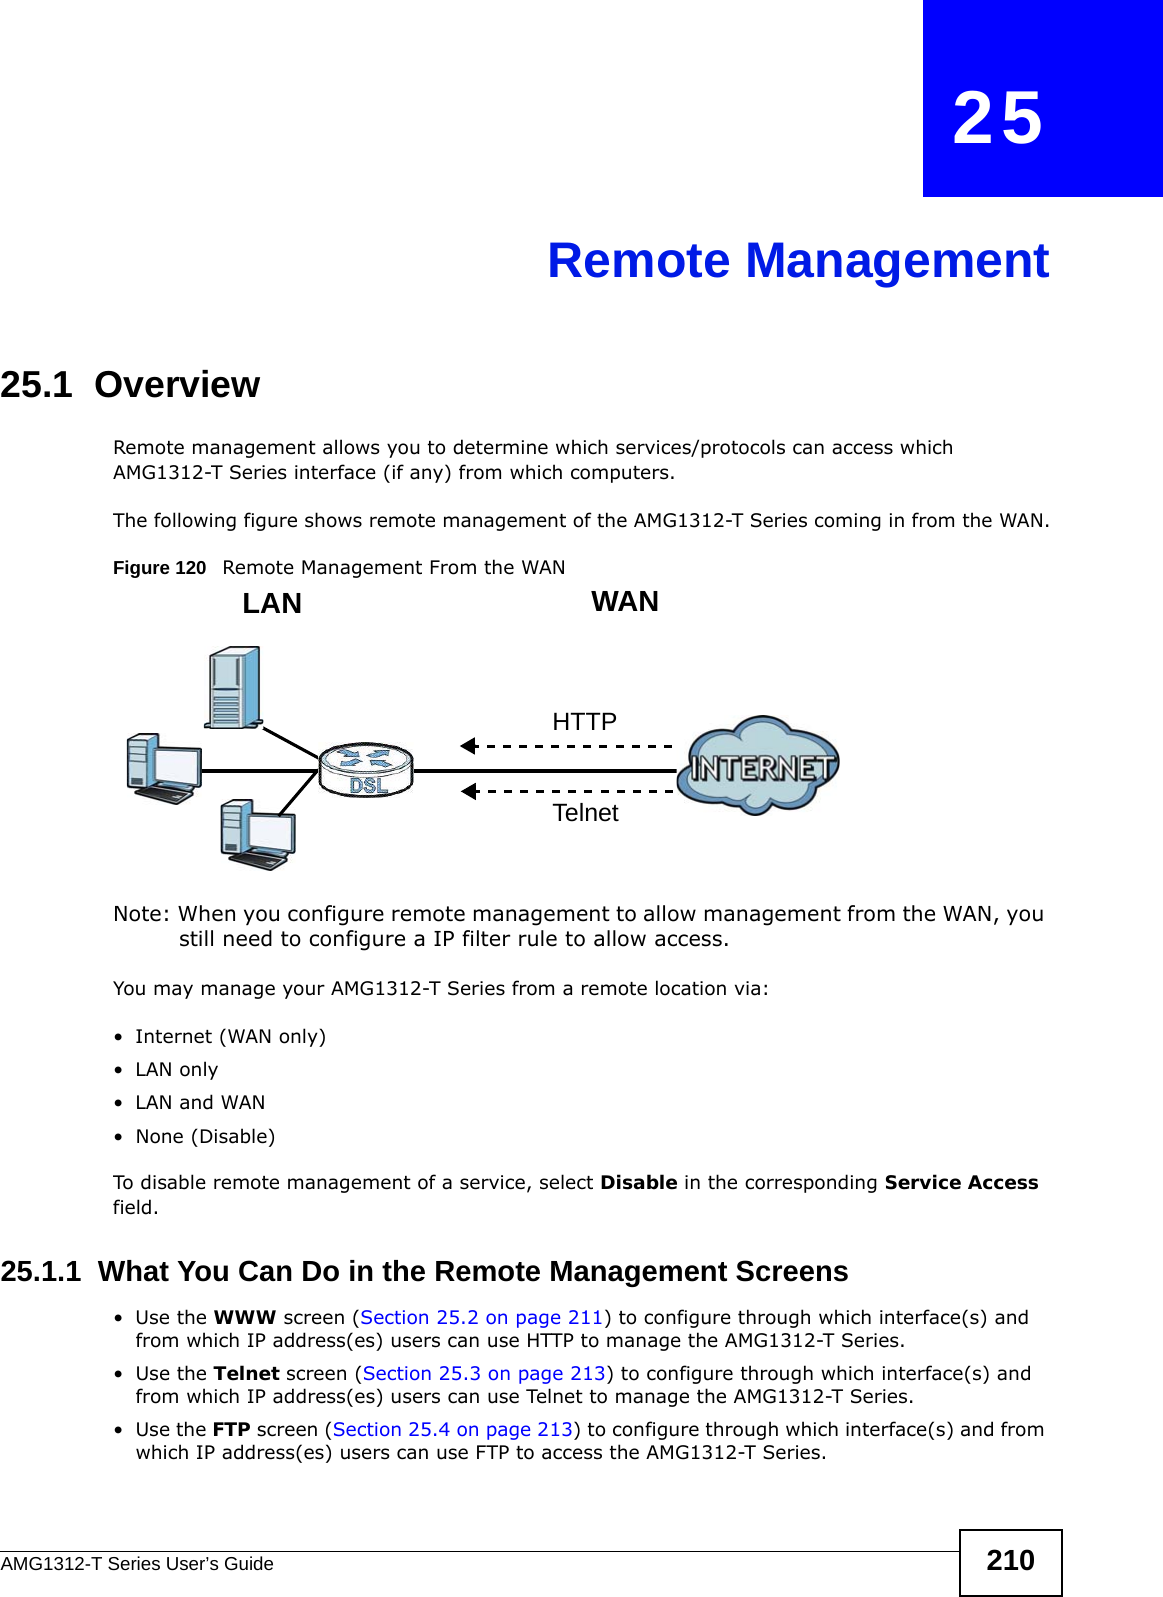 AMG1312-T Series User’s Guide 210CHAPTER   25Remote Management25.1  OverviewRemote management allows you to determine which services/protocols can access which AMG1312-T Series interface (if any) from which computers.The following figure shows remote management of the AMG1312-T Series coming in from the WAN.Figure 120   Remote Management From the WANNote: When you configure remote management to allow management from the WAN, you still need to configure a IP filter rule to allow access.You may manage your AMG1312-T Series from a remote location via:• Internet (WAN only)•LAN only•LAN and WAN• None (Disable)To disable remote management of a service, select Disable in the corresponding Service Access field.25.1.1  What You Can Do in the Remote Management Screens•Use the WWW screen (Section 25.2 on page 211) to configure through which interface(s) and from which IP address(es) users can use HTTP to manage the AMG1312-T Series.•Use the Telnet screen (Section 25.3 on page 213) to configure through which interface(s) and from which IP address(es) users can use Telnet to manage the AMG1312-T Series.•Use the FTP screen (Section 25.4 on page 213) to configure through which interface(s) and from which IP address(es) users can use FTP to access the AMG1312-T Series.LAN WANHTTPTelnet